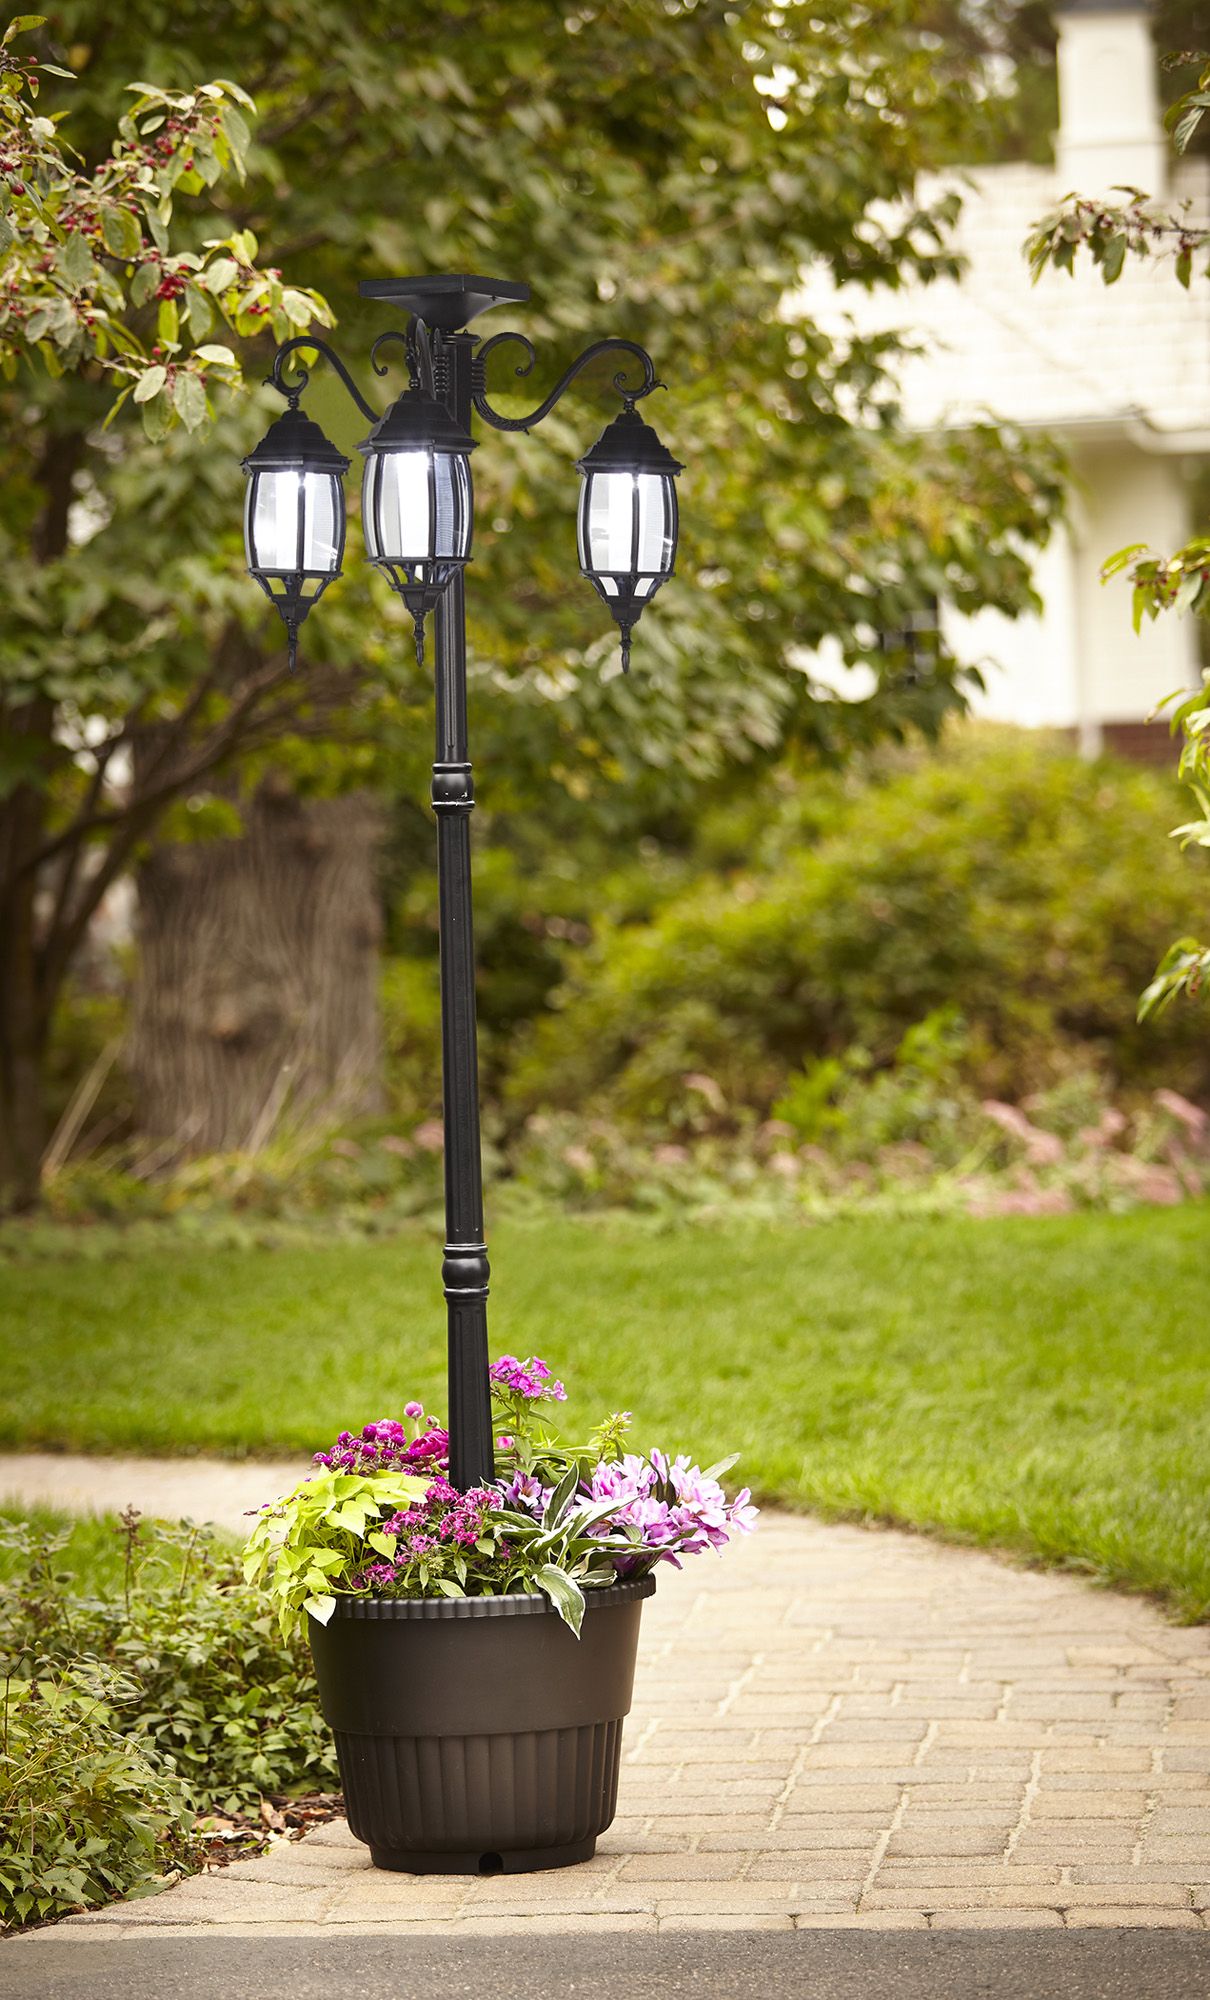 Westcharm 6.6 ft. (79 in.) Tall Black Solar Powered Lamp Post with Round  Planter for Garden, Heads, White LEDs